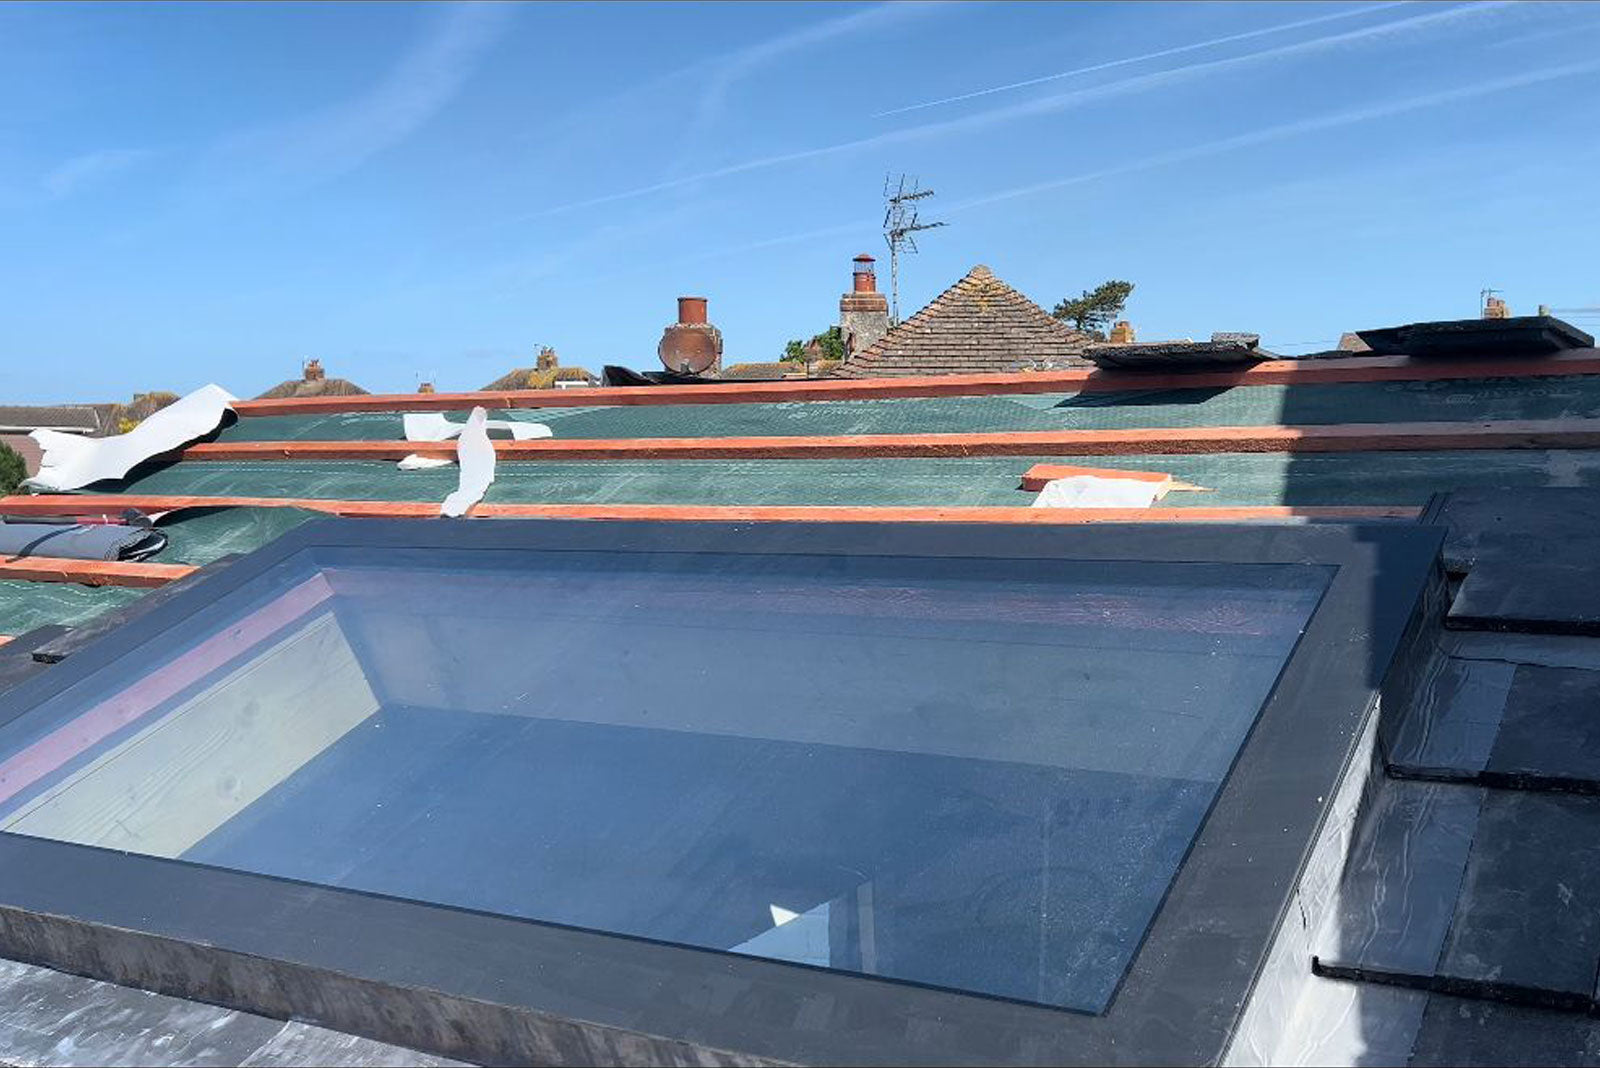 Pitched Roof Skylight 800 x 1500mm